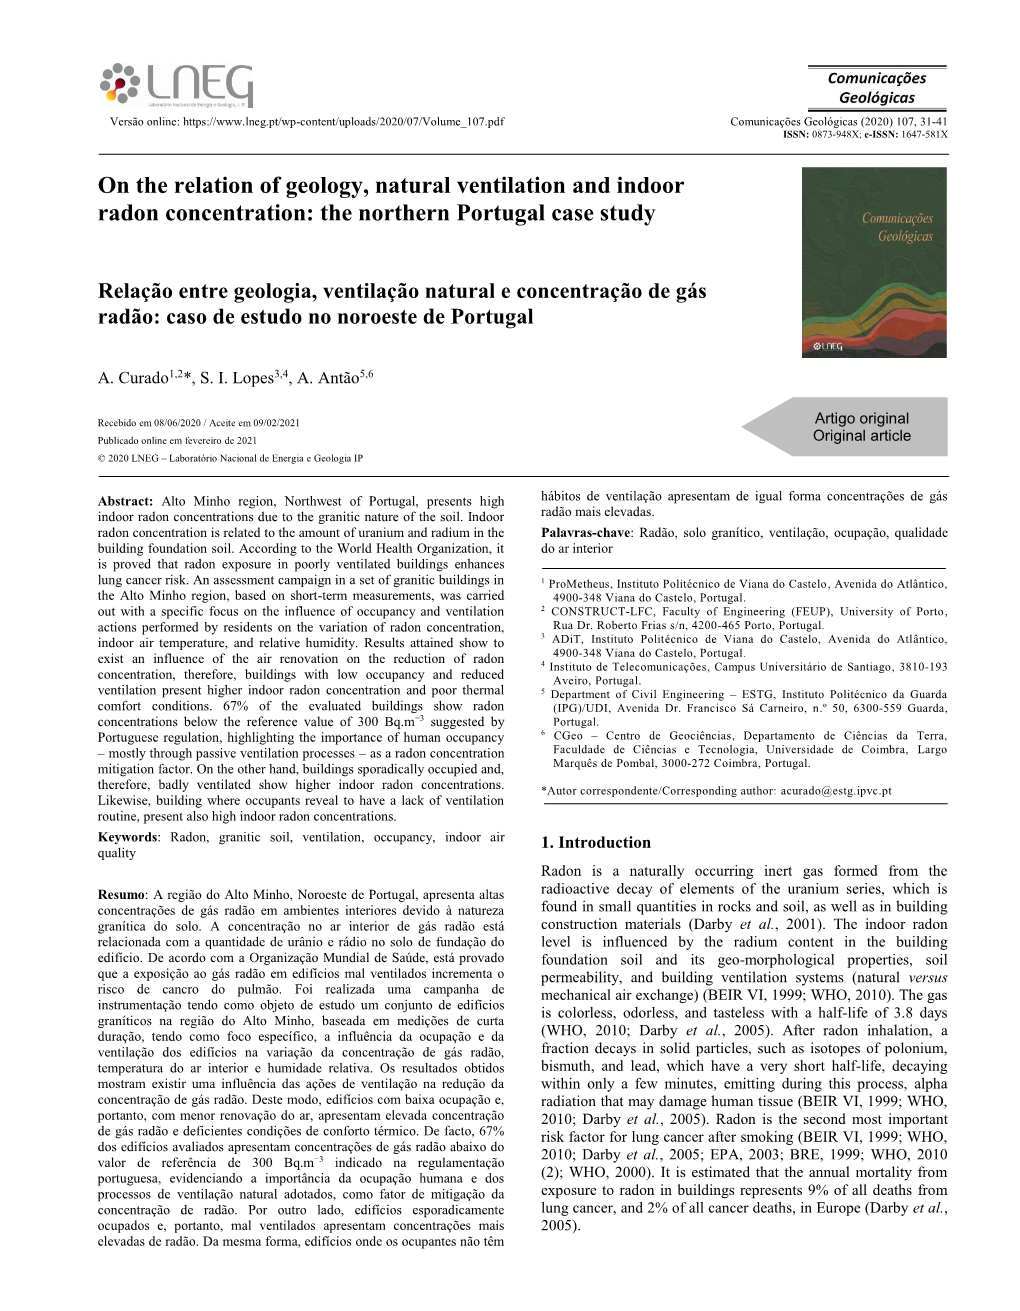 On the Relation of Geology, Natural Ventilation and Indoor Radon Concentration: the Northern Portugal Case Study